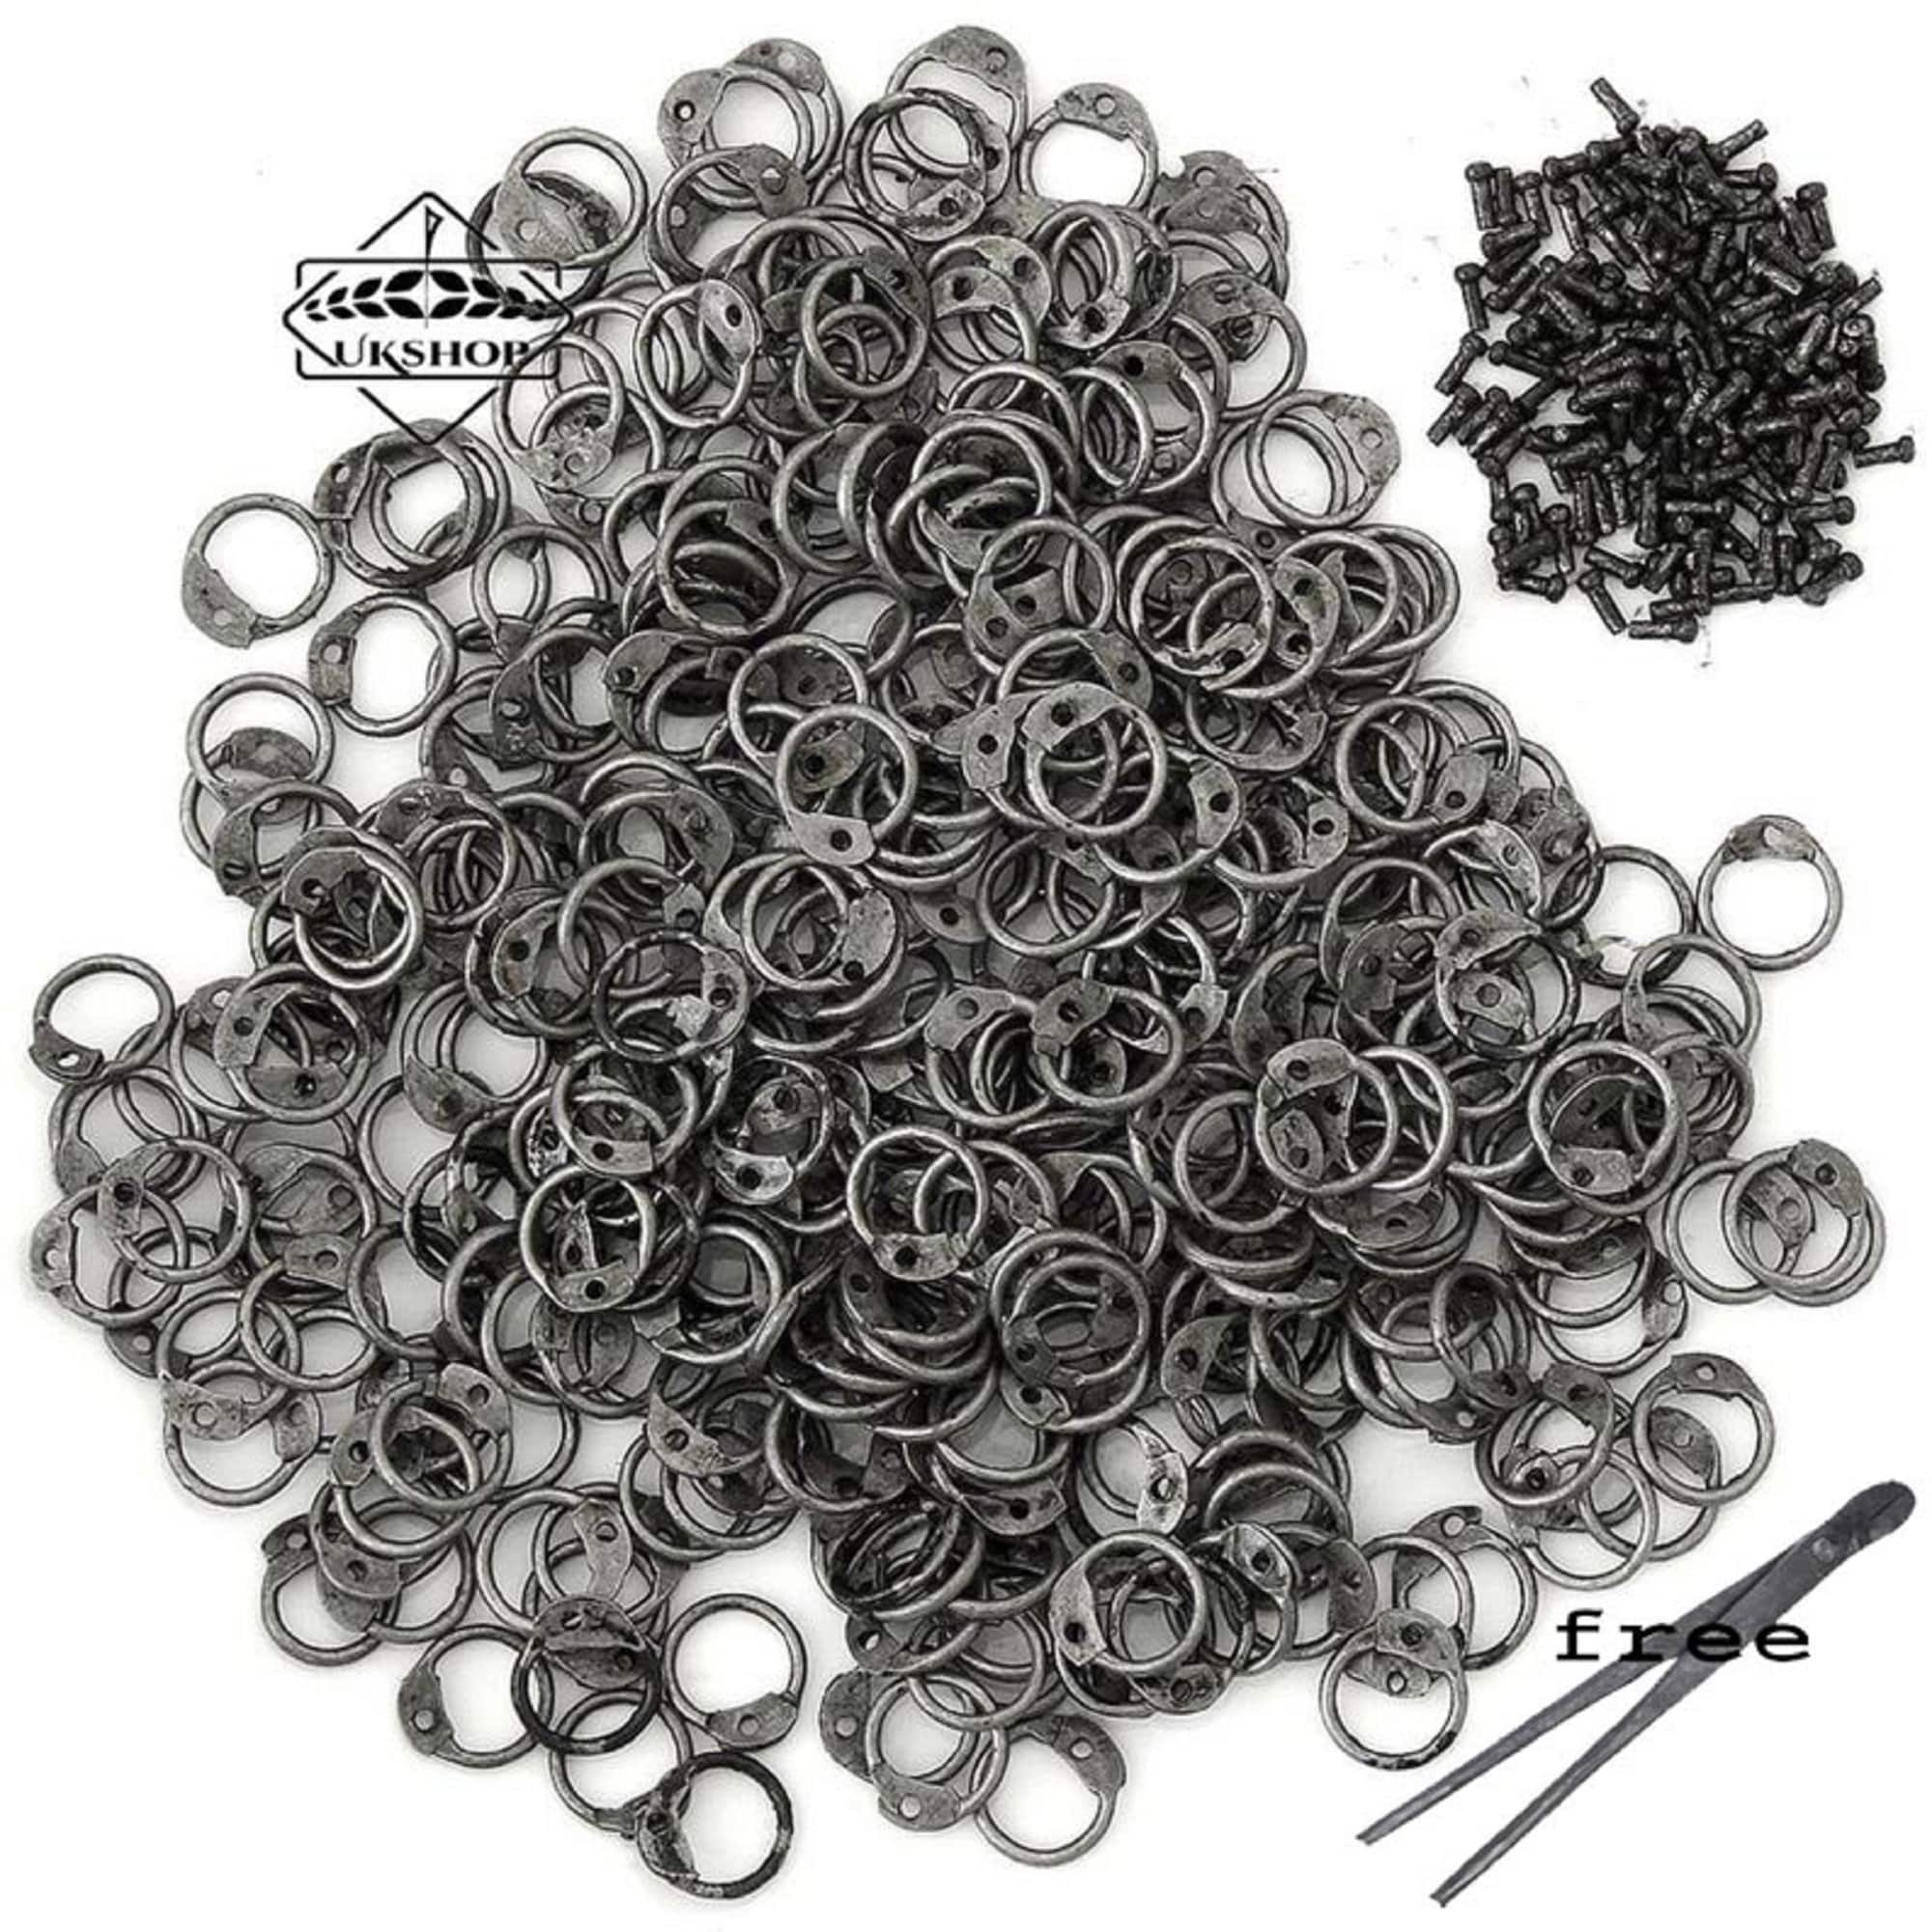 Sca Leather Armor - Loose Chainmail Rings - Blackened Flat Ring Dome  Riveted 6mm